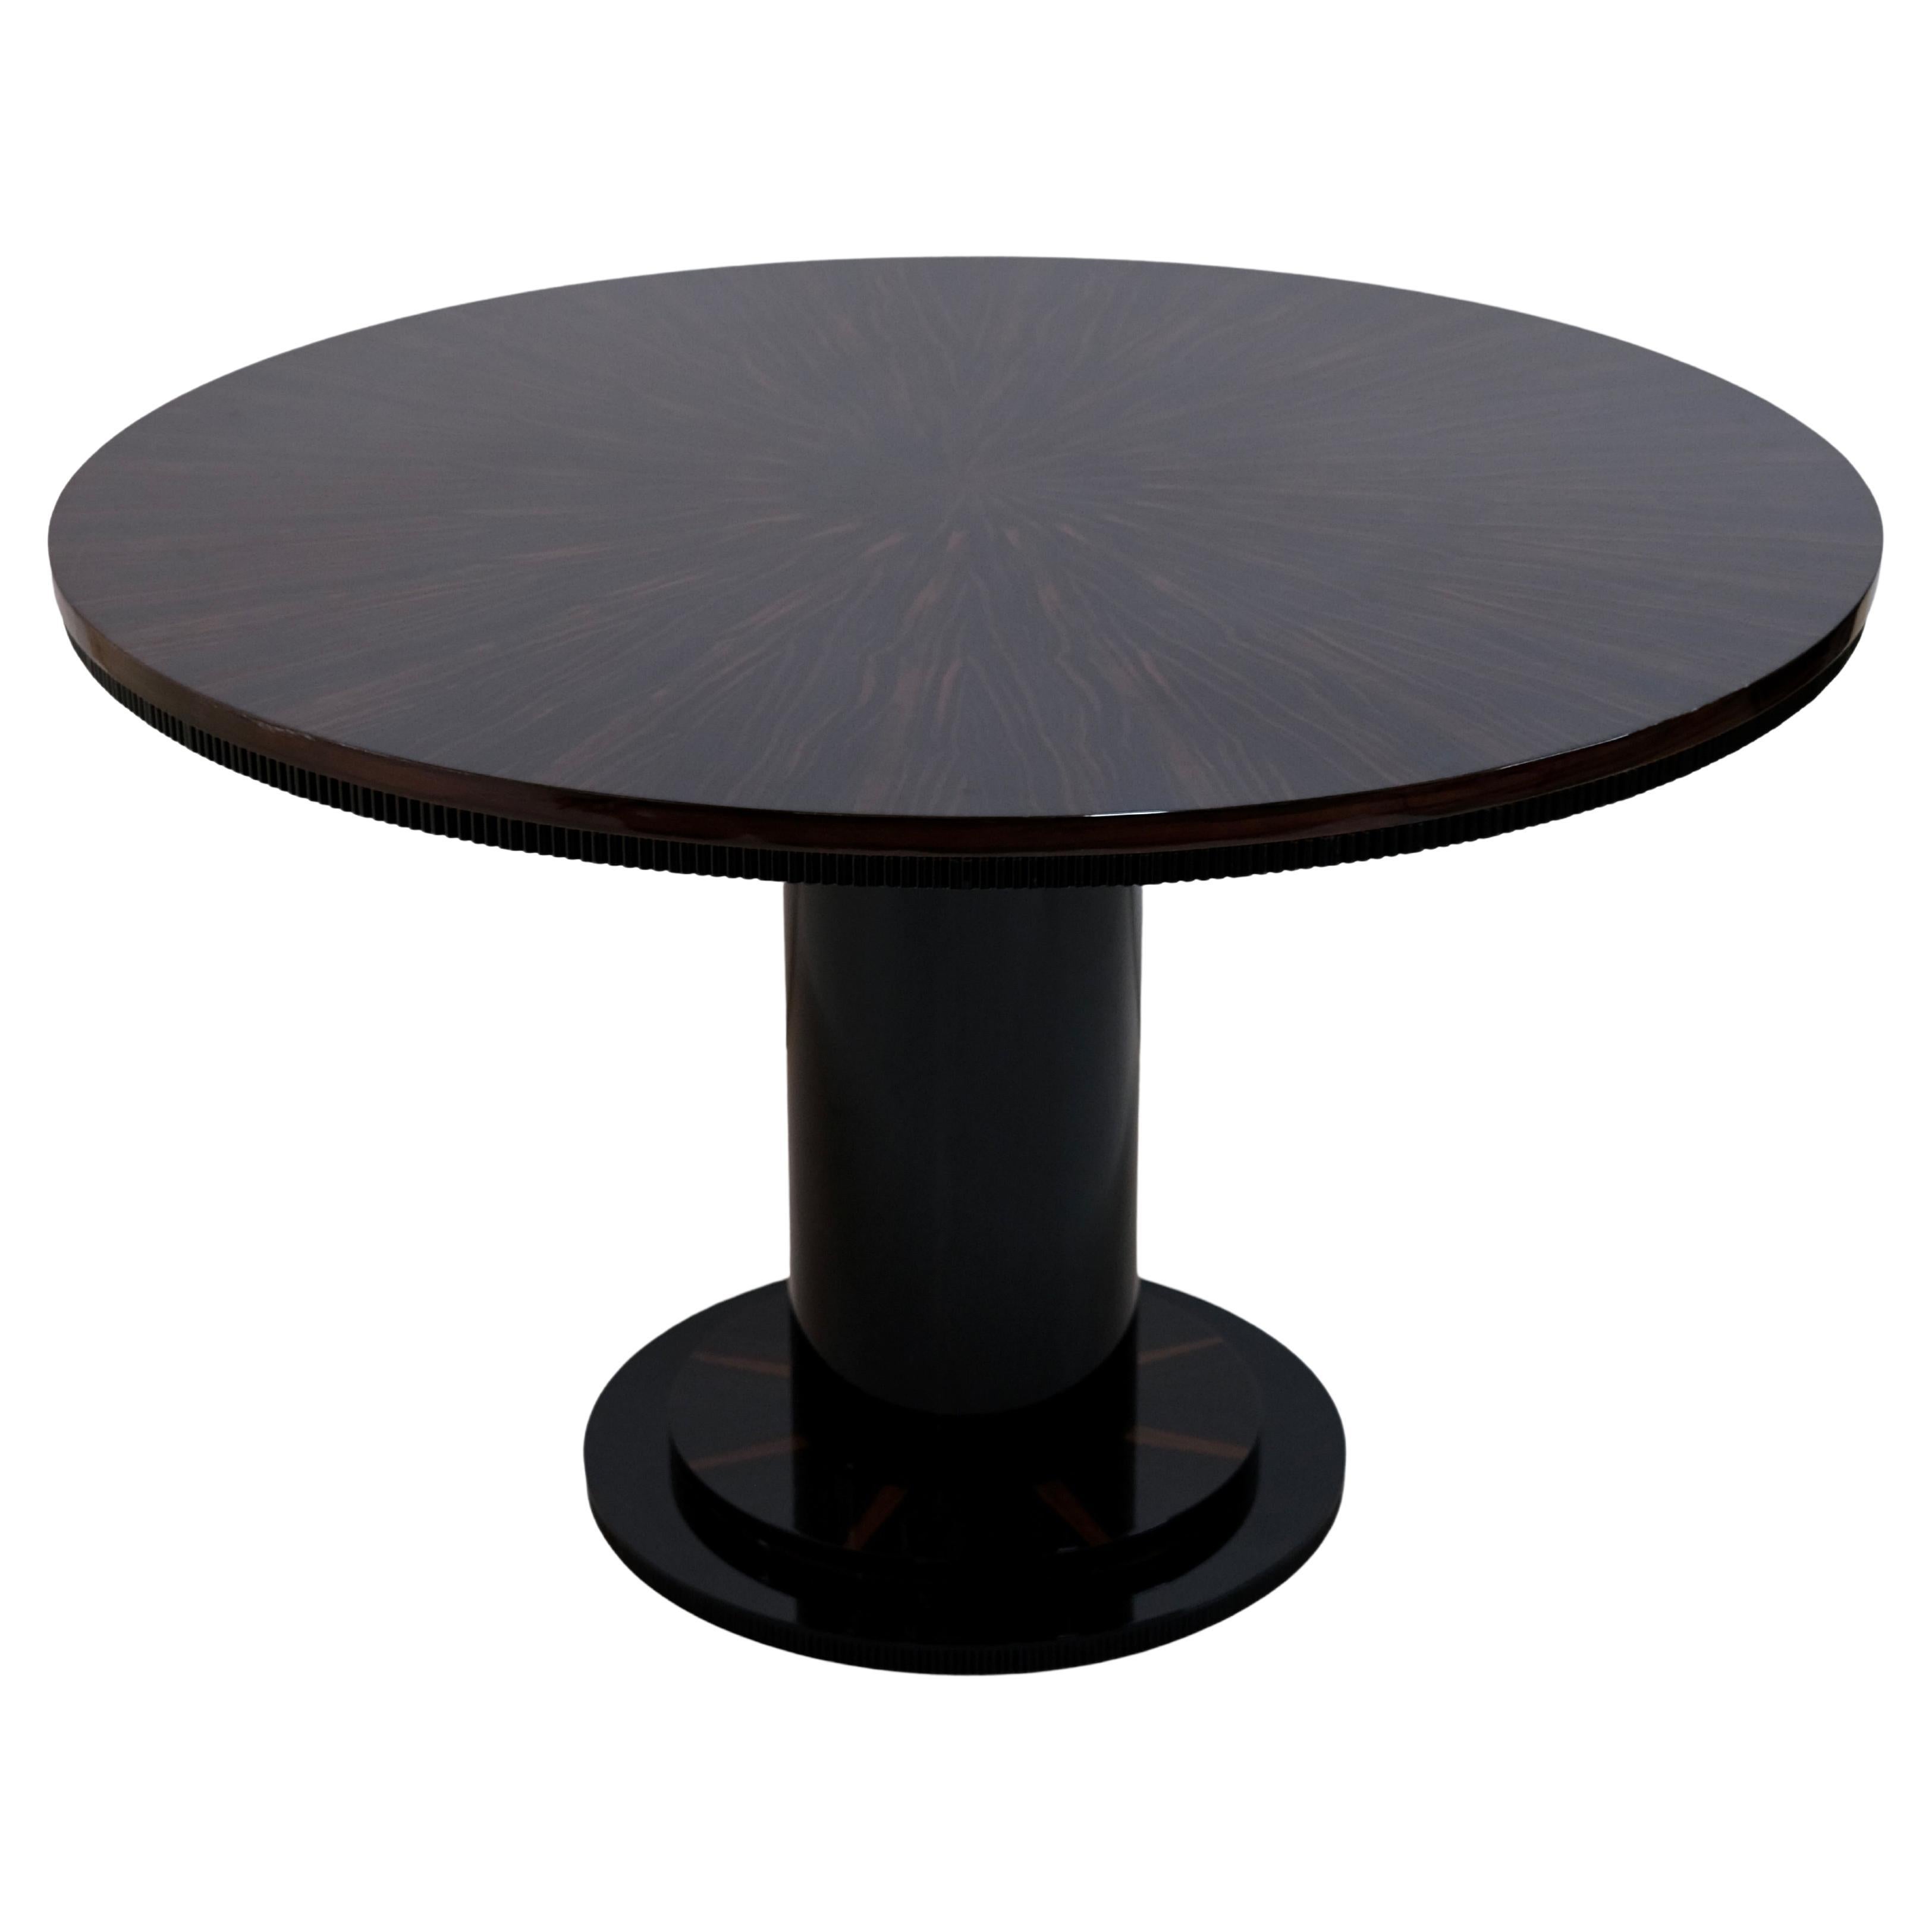 Round Art Deco Style Dining or Center Table in Real Wood Veneer